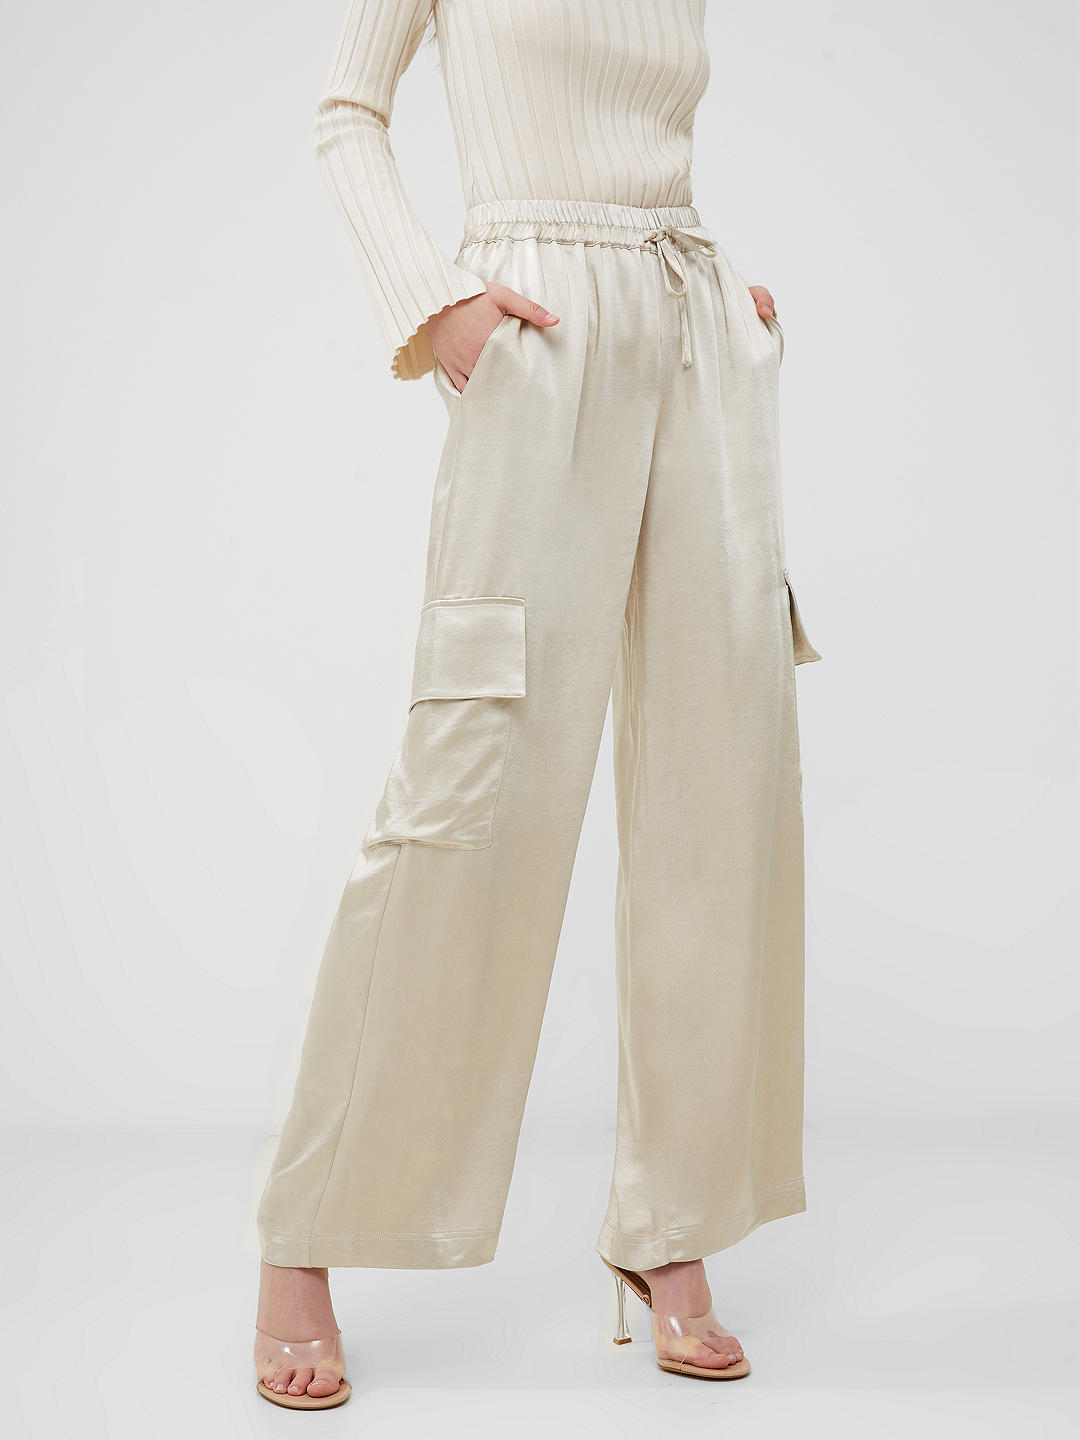 French Connection Chloetta Cargo Trousers, Silver Lining       